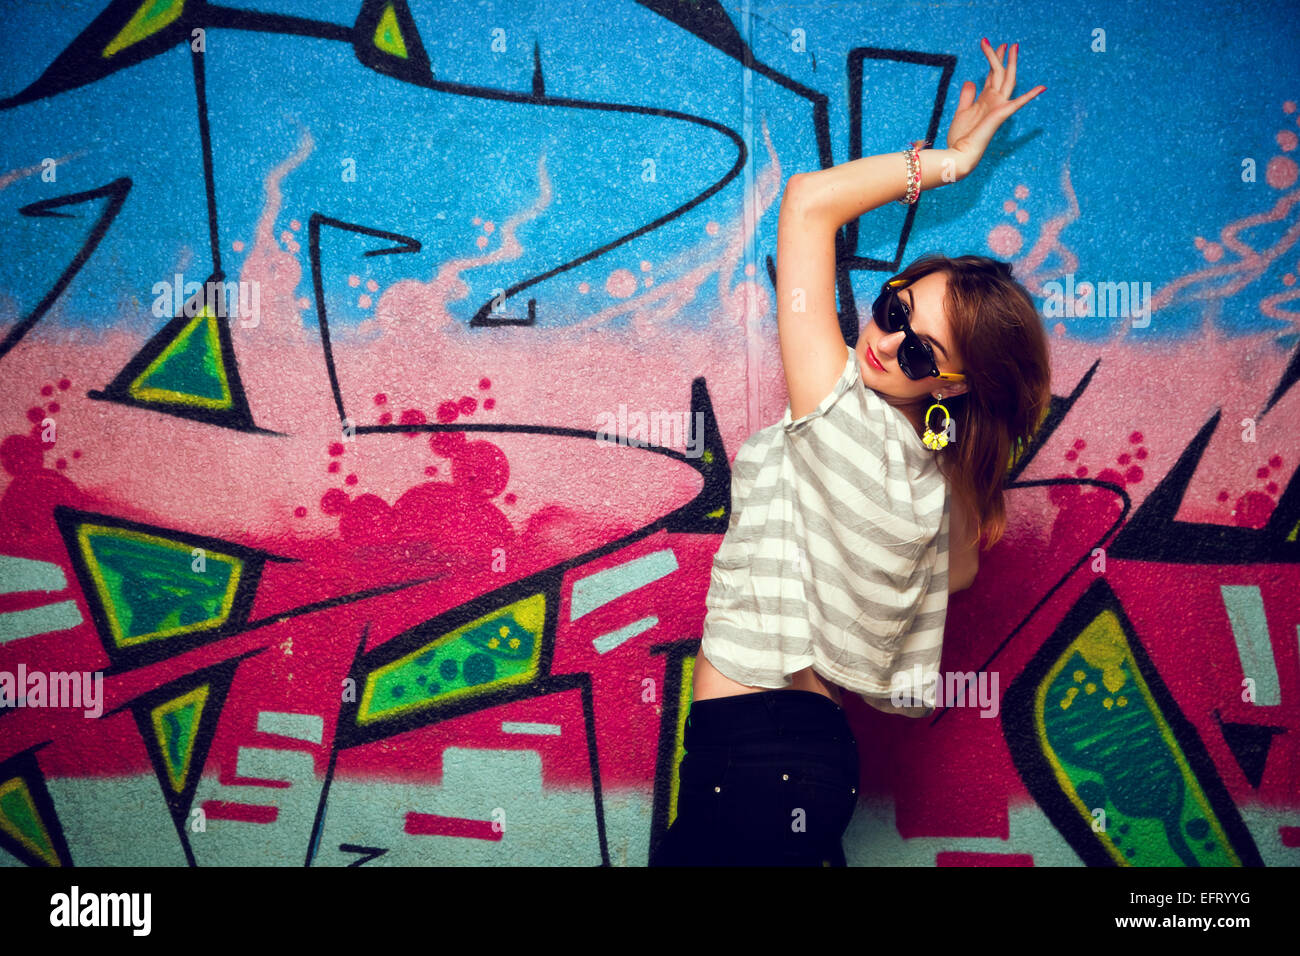 Stylish fashionable girl in a dance pose against colorful graffiti wall. Fashion, trends, subculture. Stock Photo